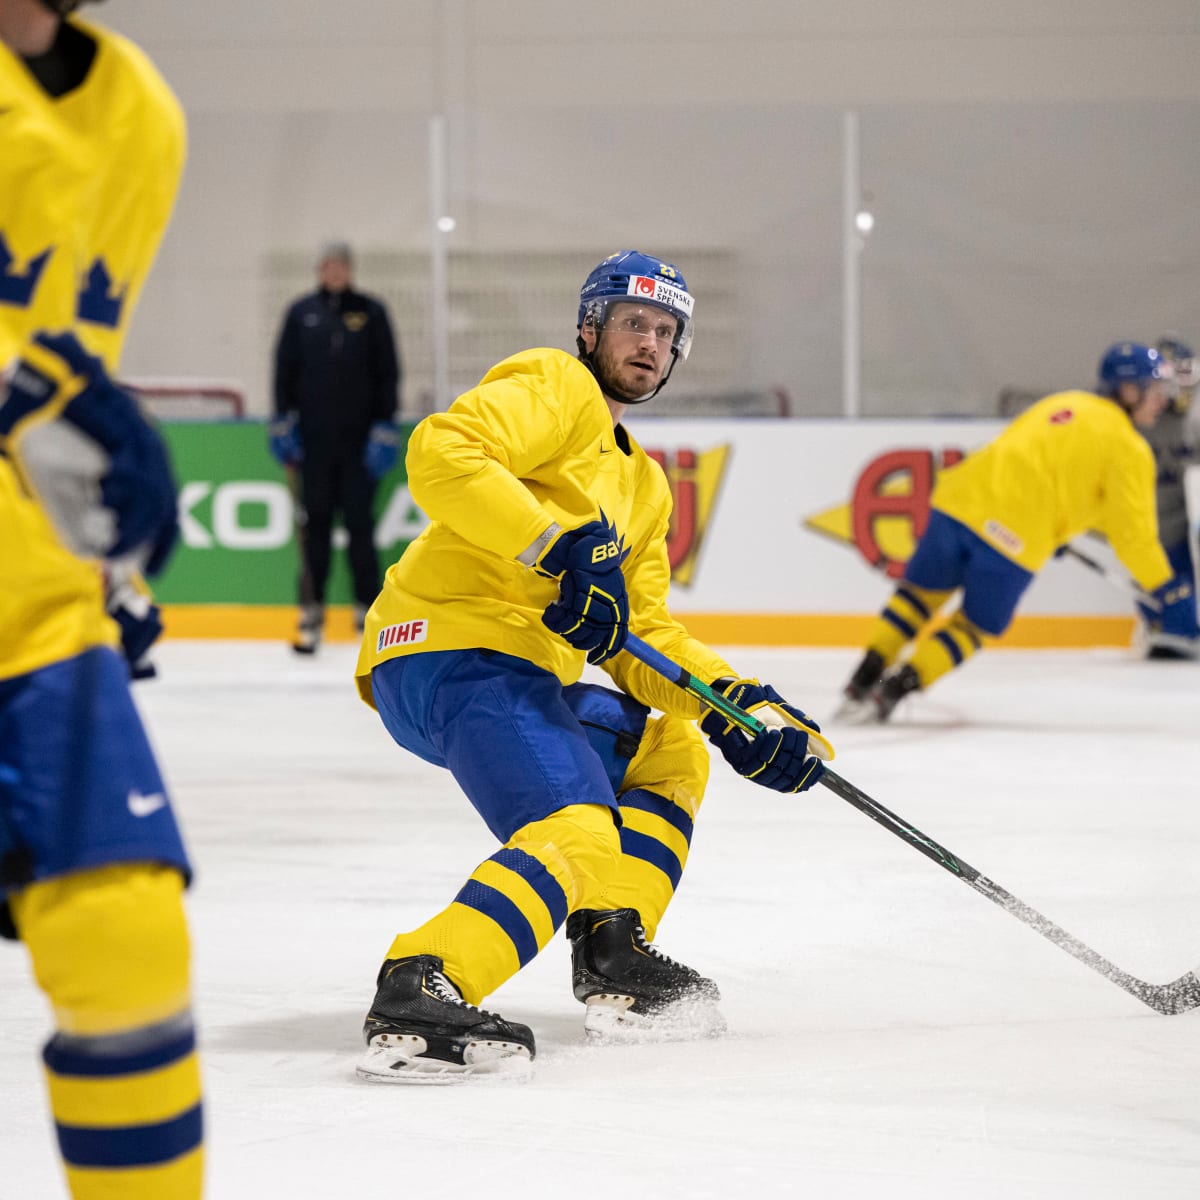 Watch Czechia vs Sweden Stream World Juniors live, TV channel - How to Watch and Stream Major League and College Sports